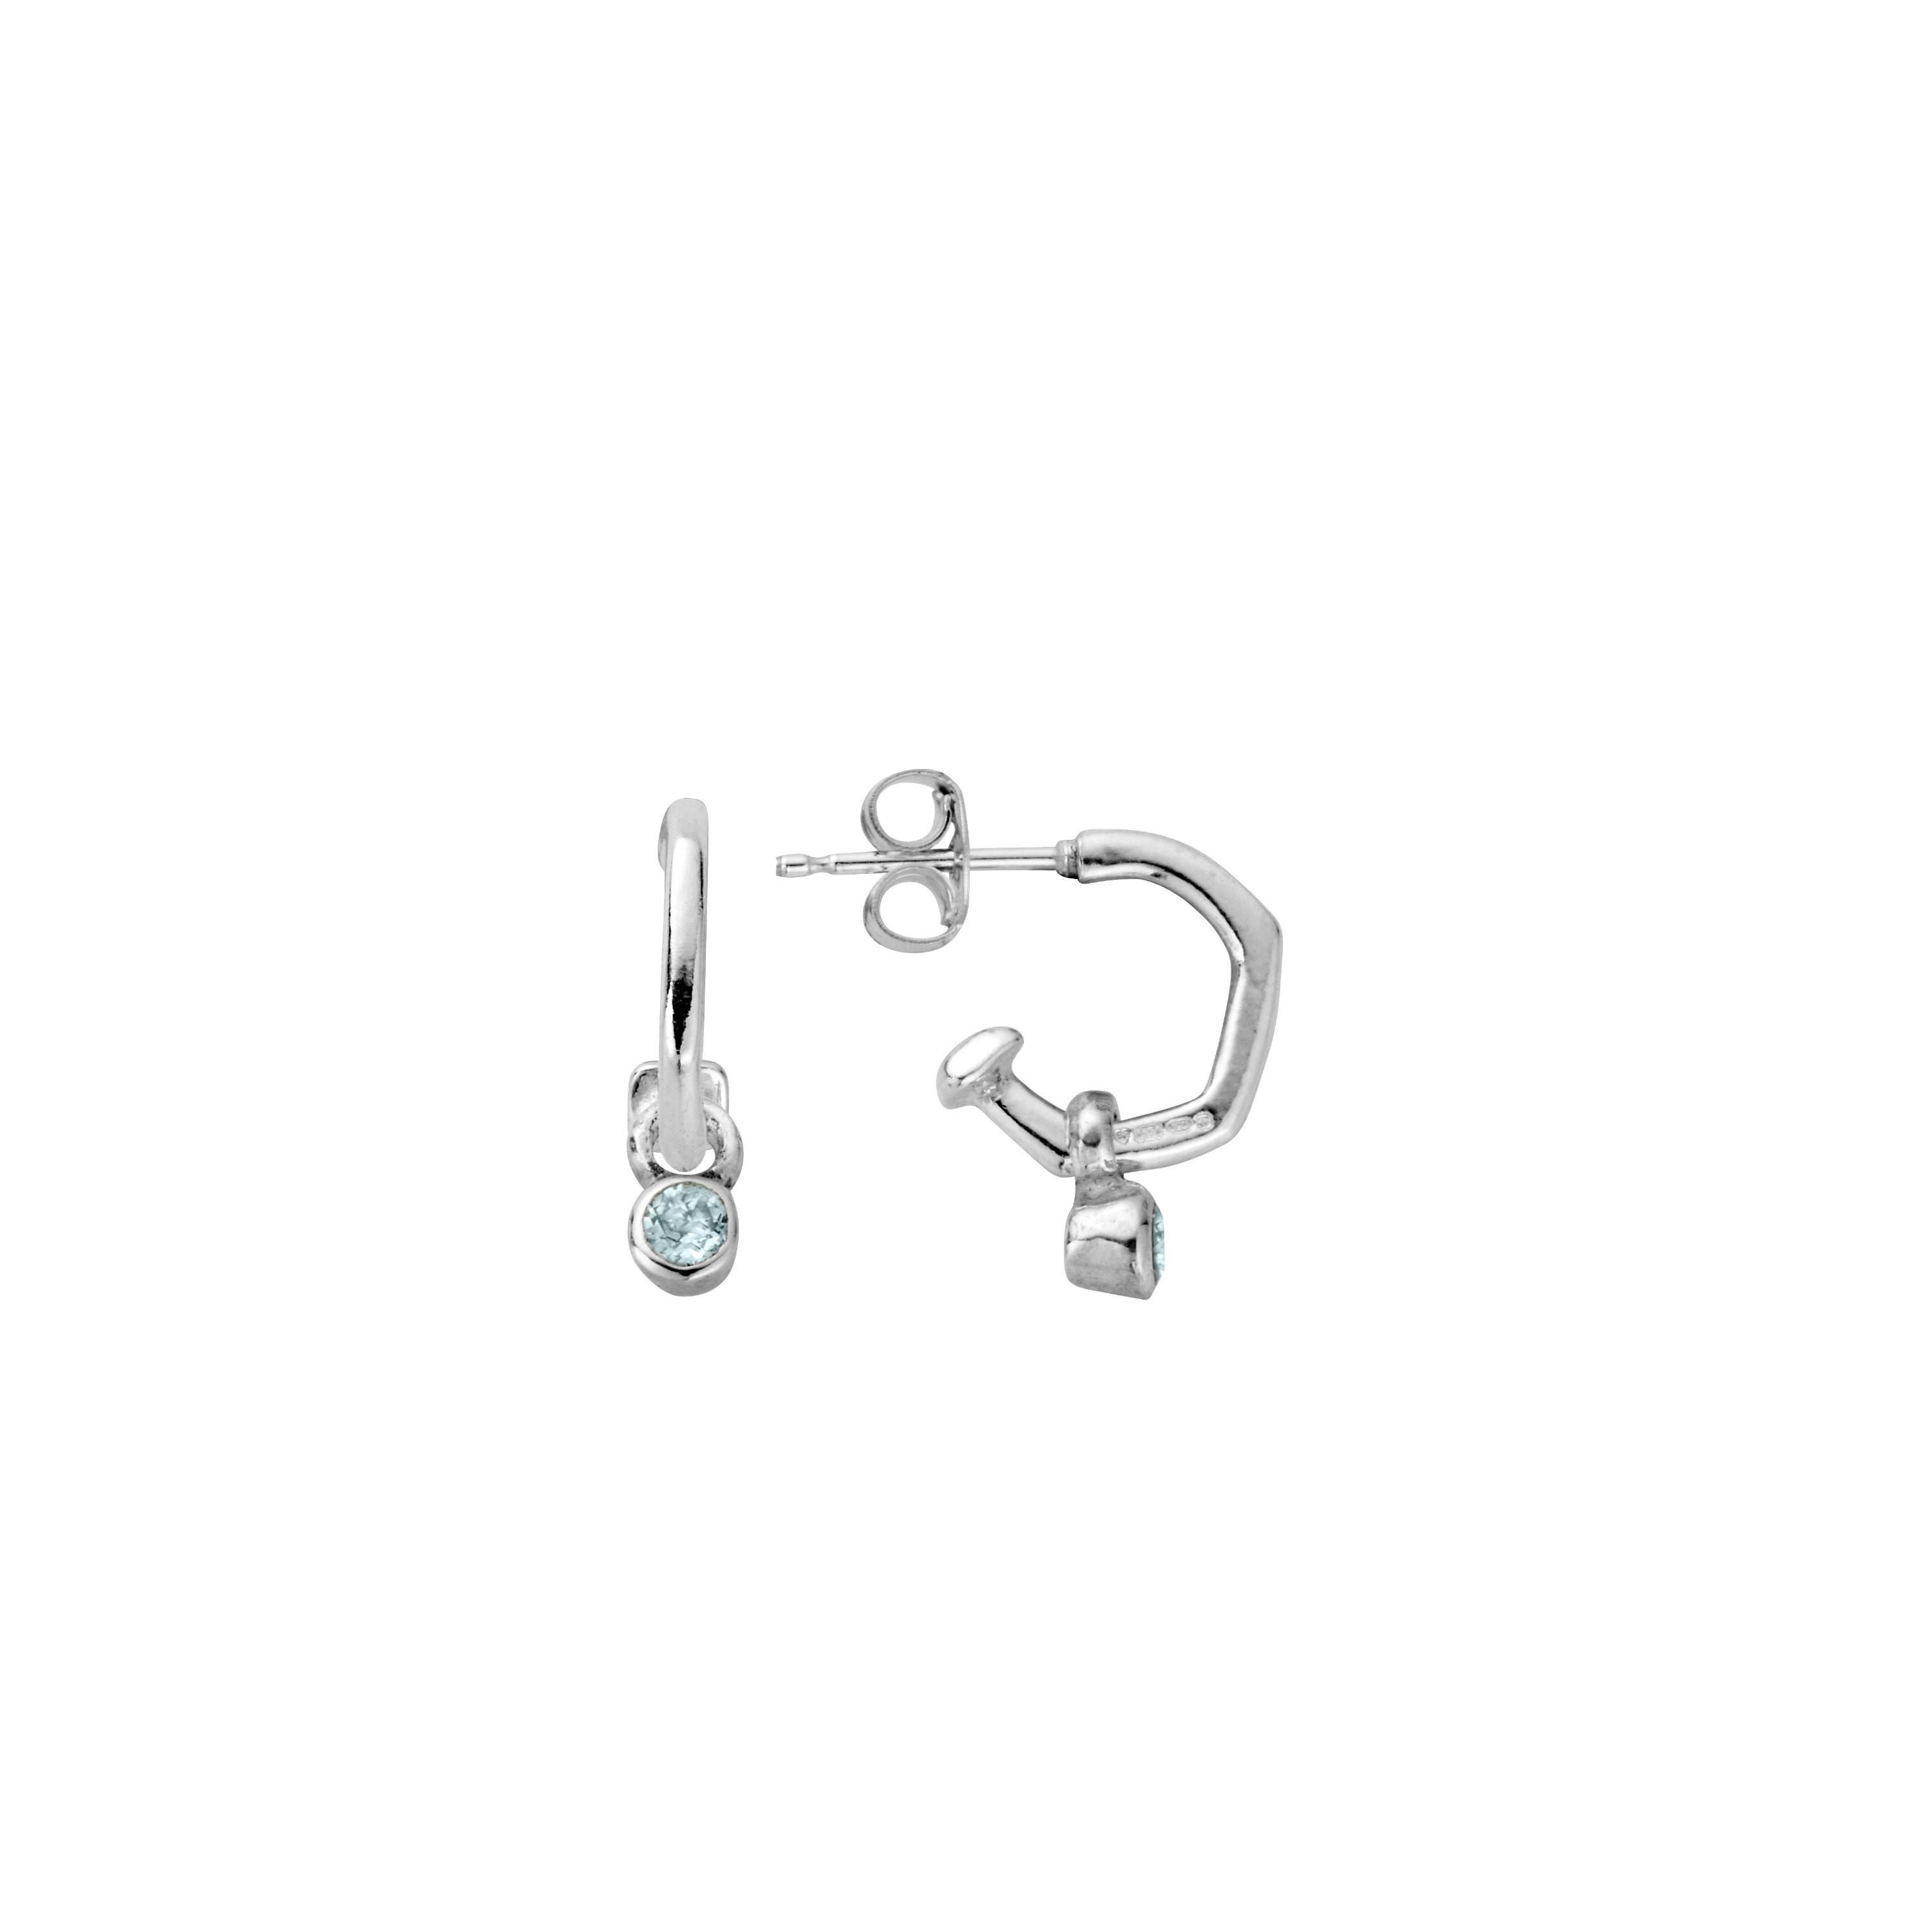 Tiny Cupid Hoops with Mini Blue Topaz Earring Charms